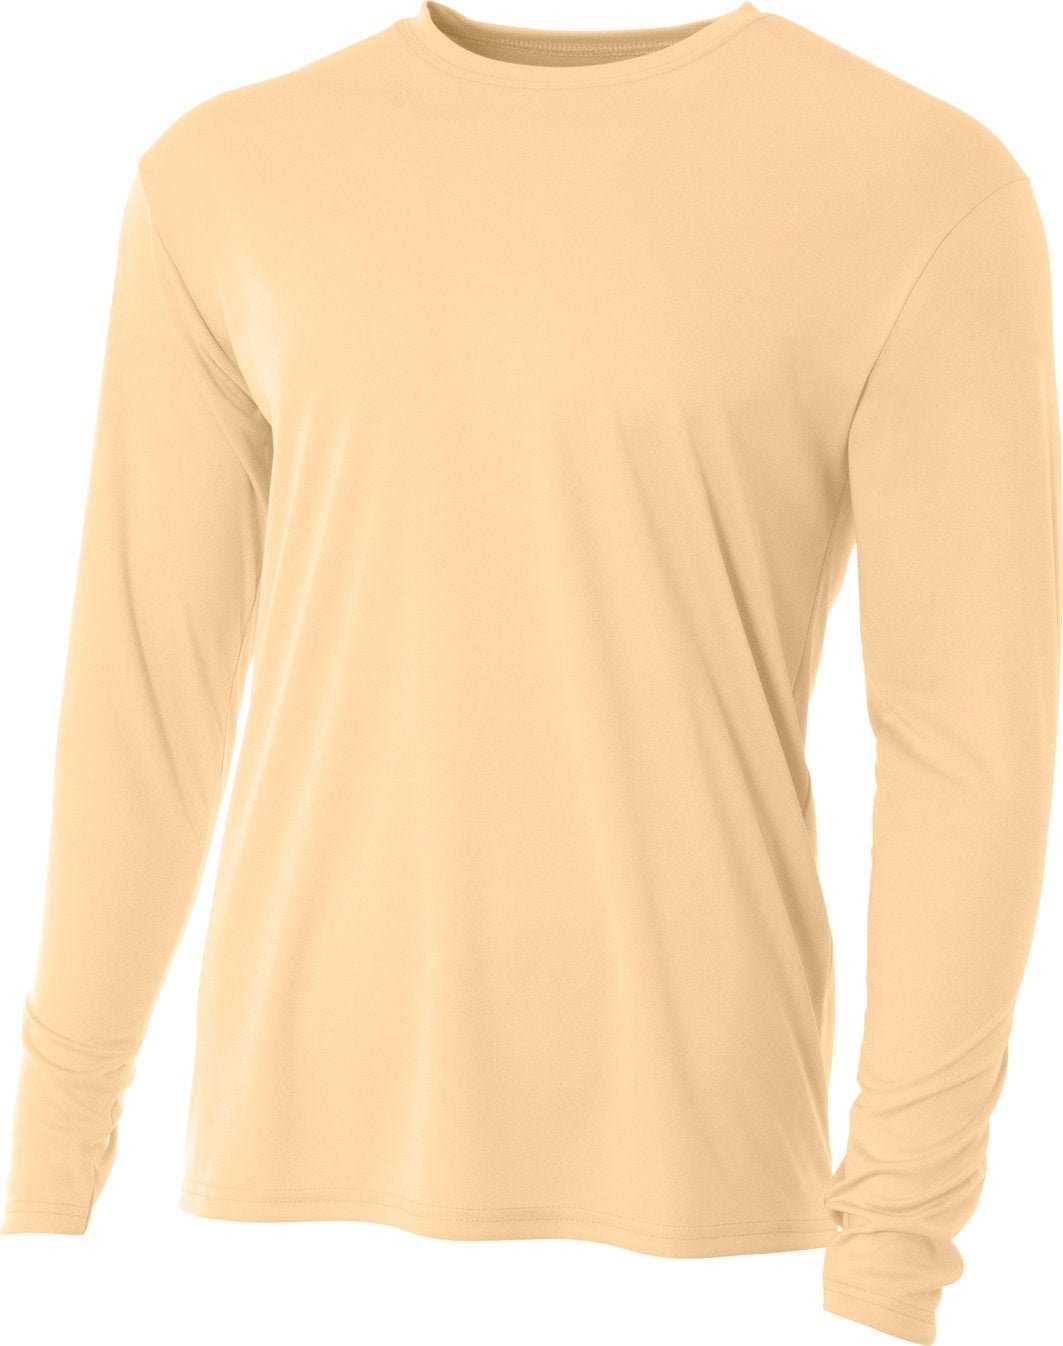 A4 N3165 Men'S Cooling Performance Long Sleeve T-Shirt - MELON - HIT a Double - 1